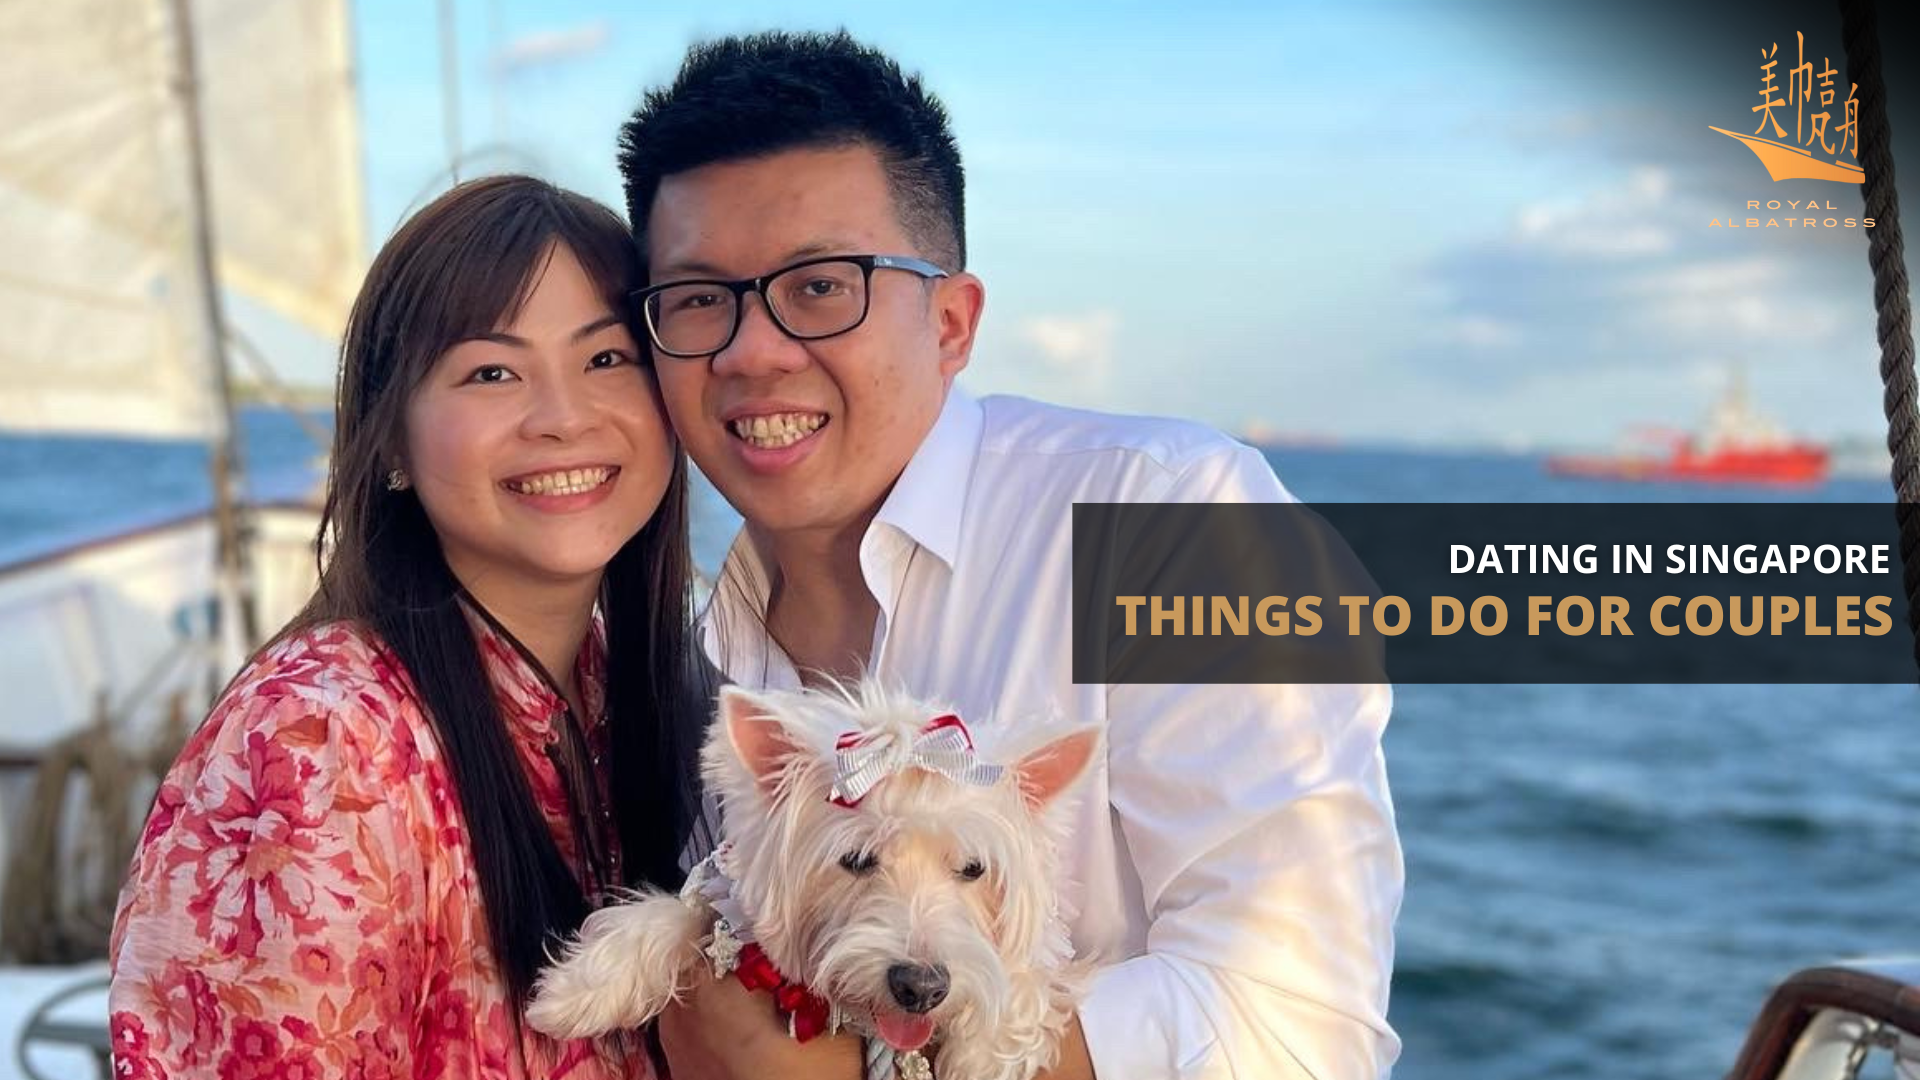 Dating in Singapore: Things to Do for Couples